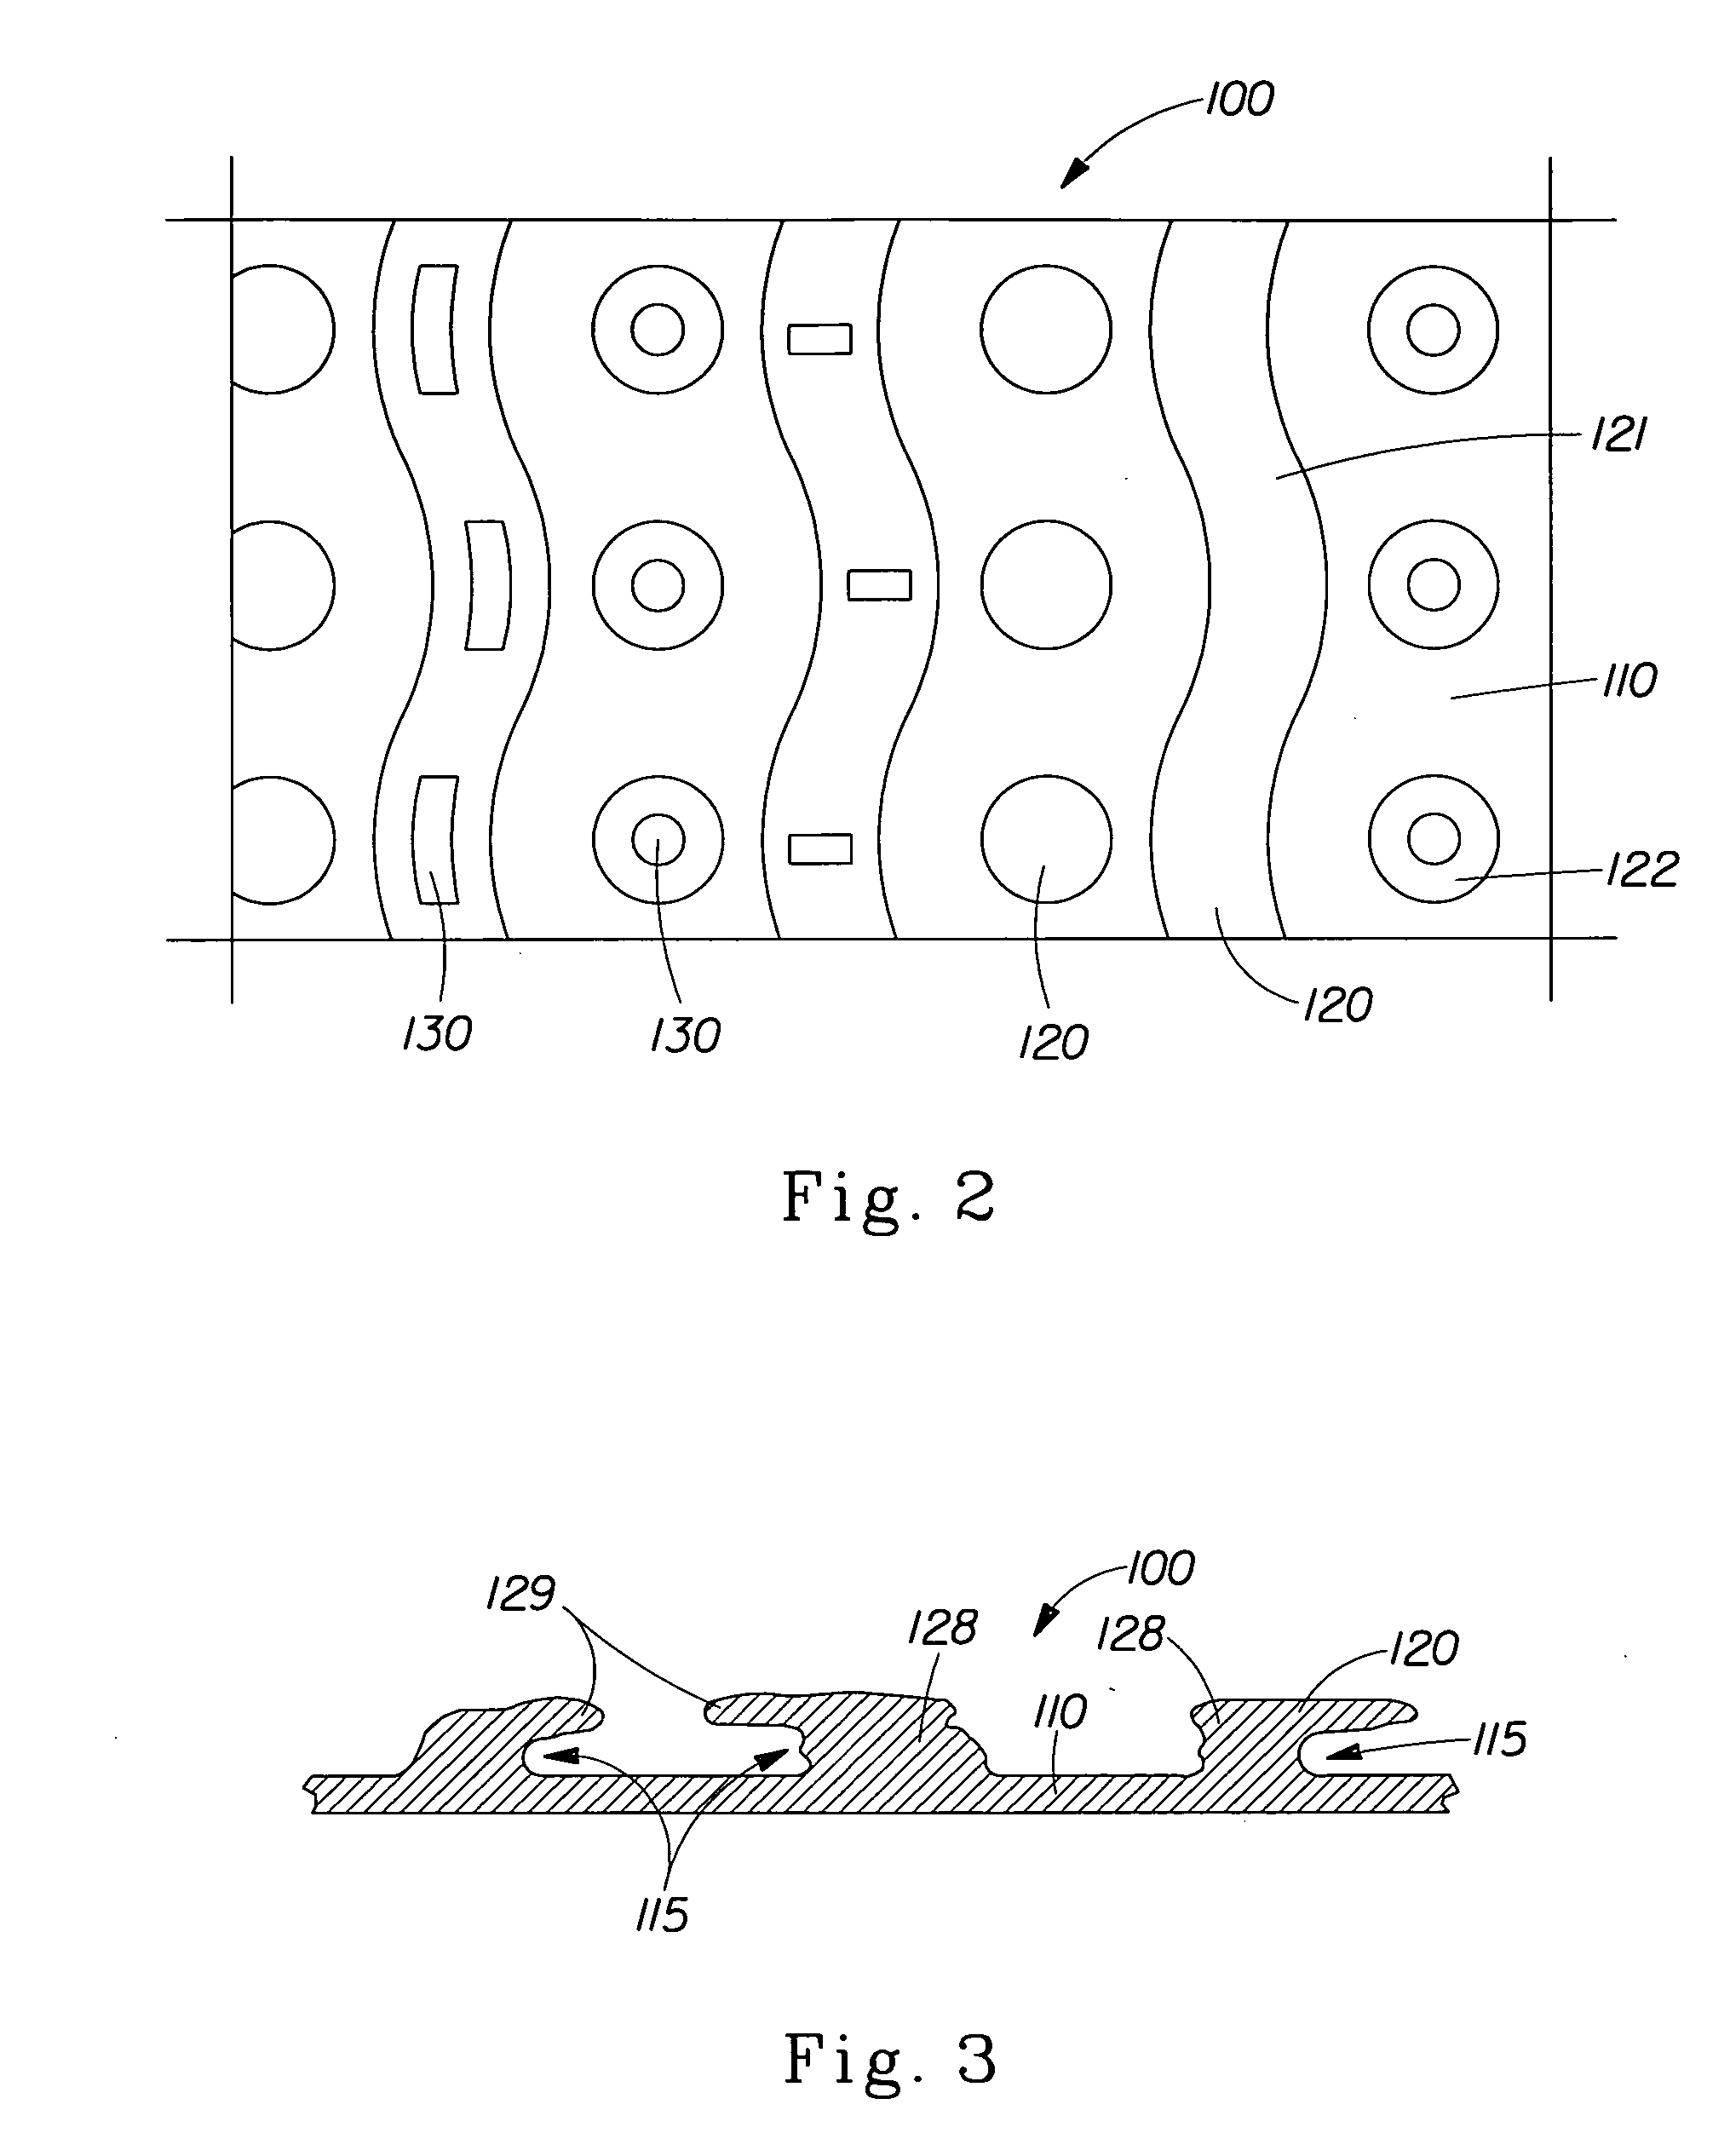 Process for making a flexible structure comprising starch filaments